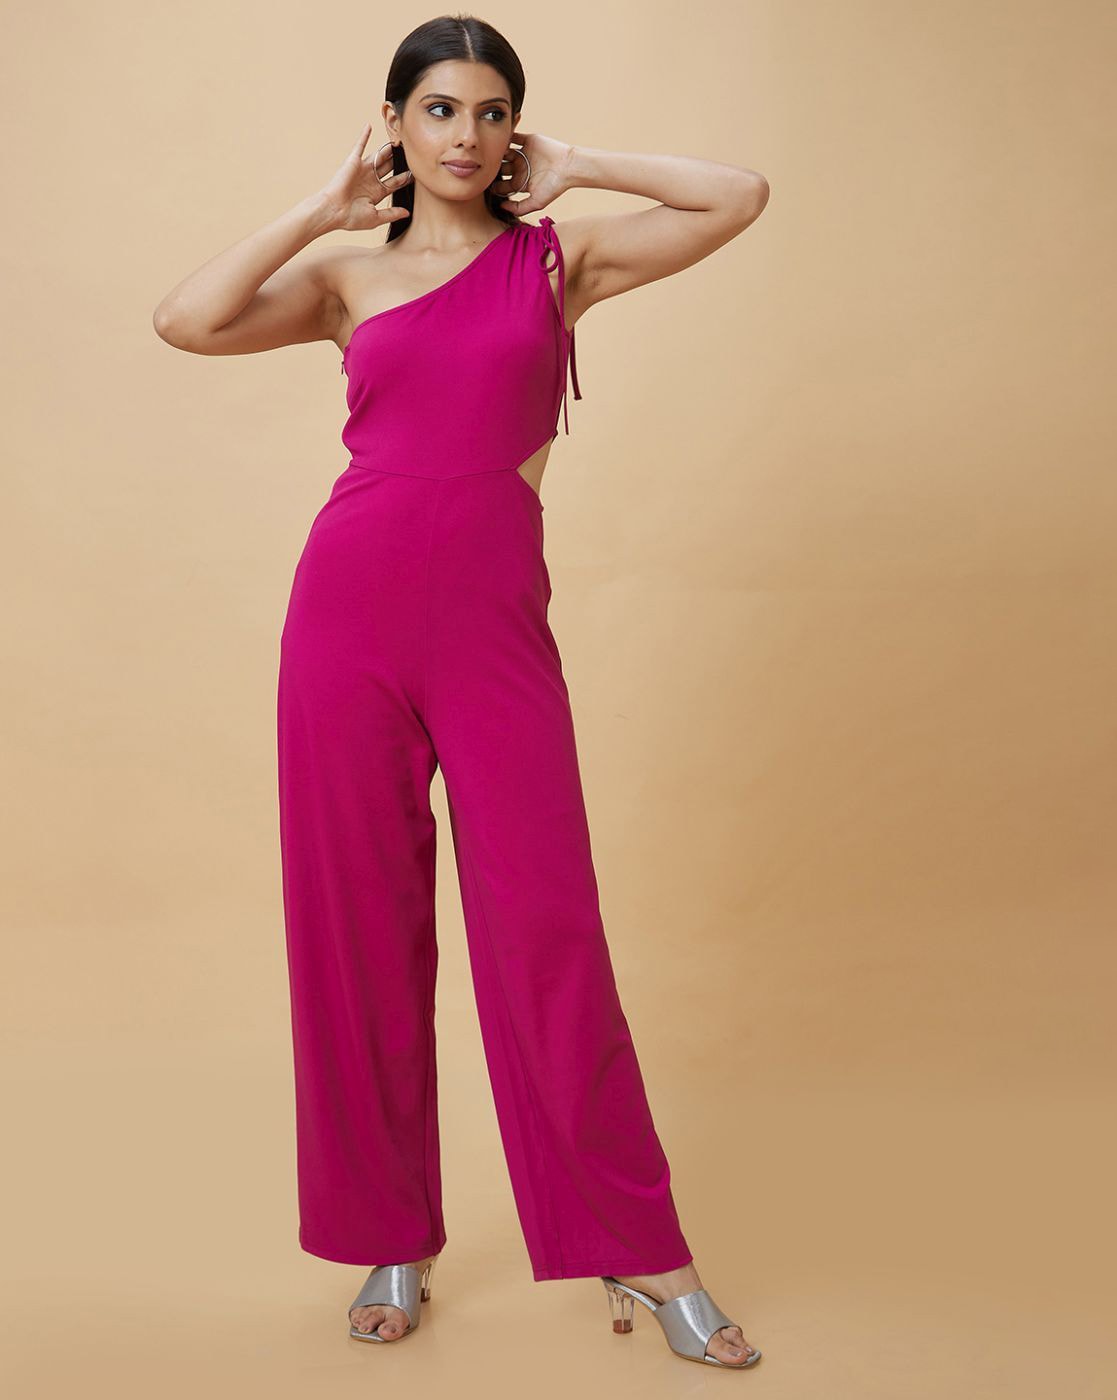 20 Outfits With One Shoulder Jumpsuits And Rompers - Styleoholic